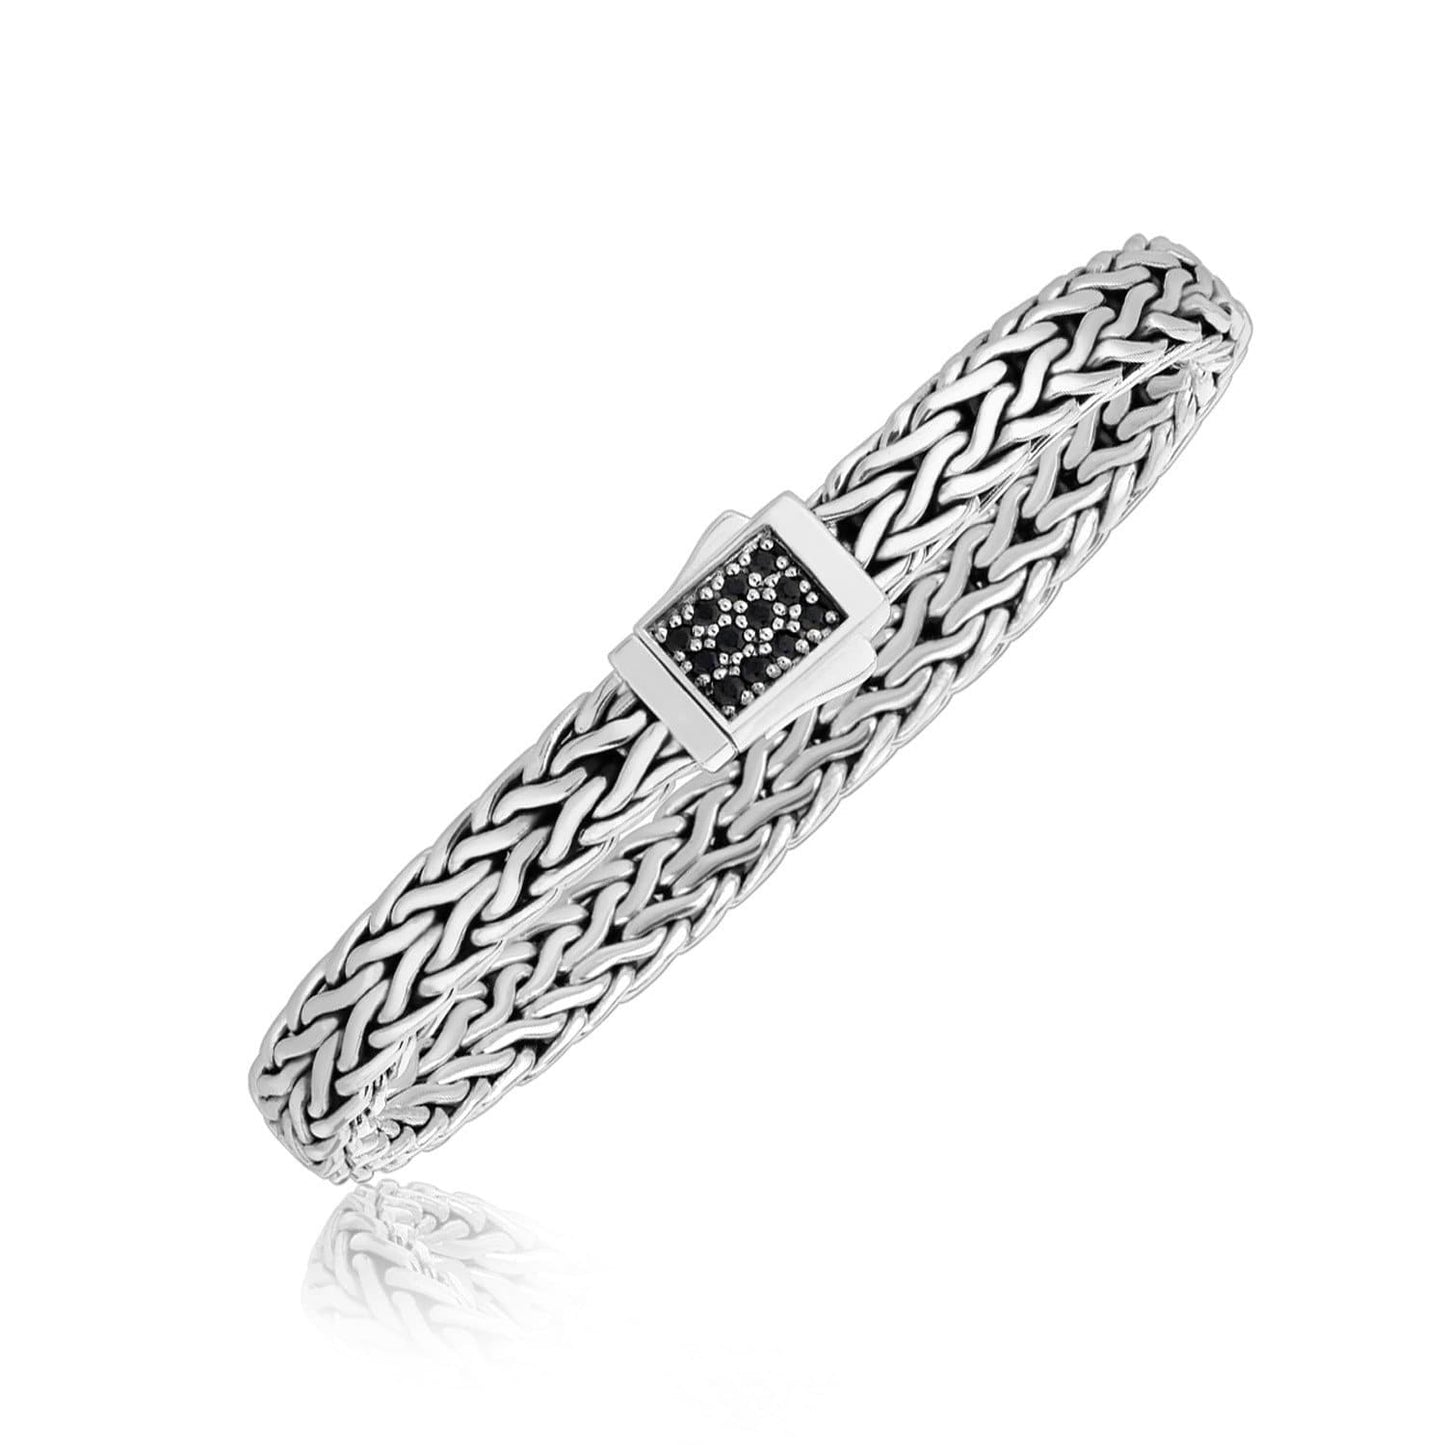 Sterling Silver Braided Men's Bracelet with Black Sapphire Stones